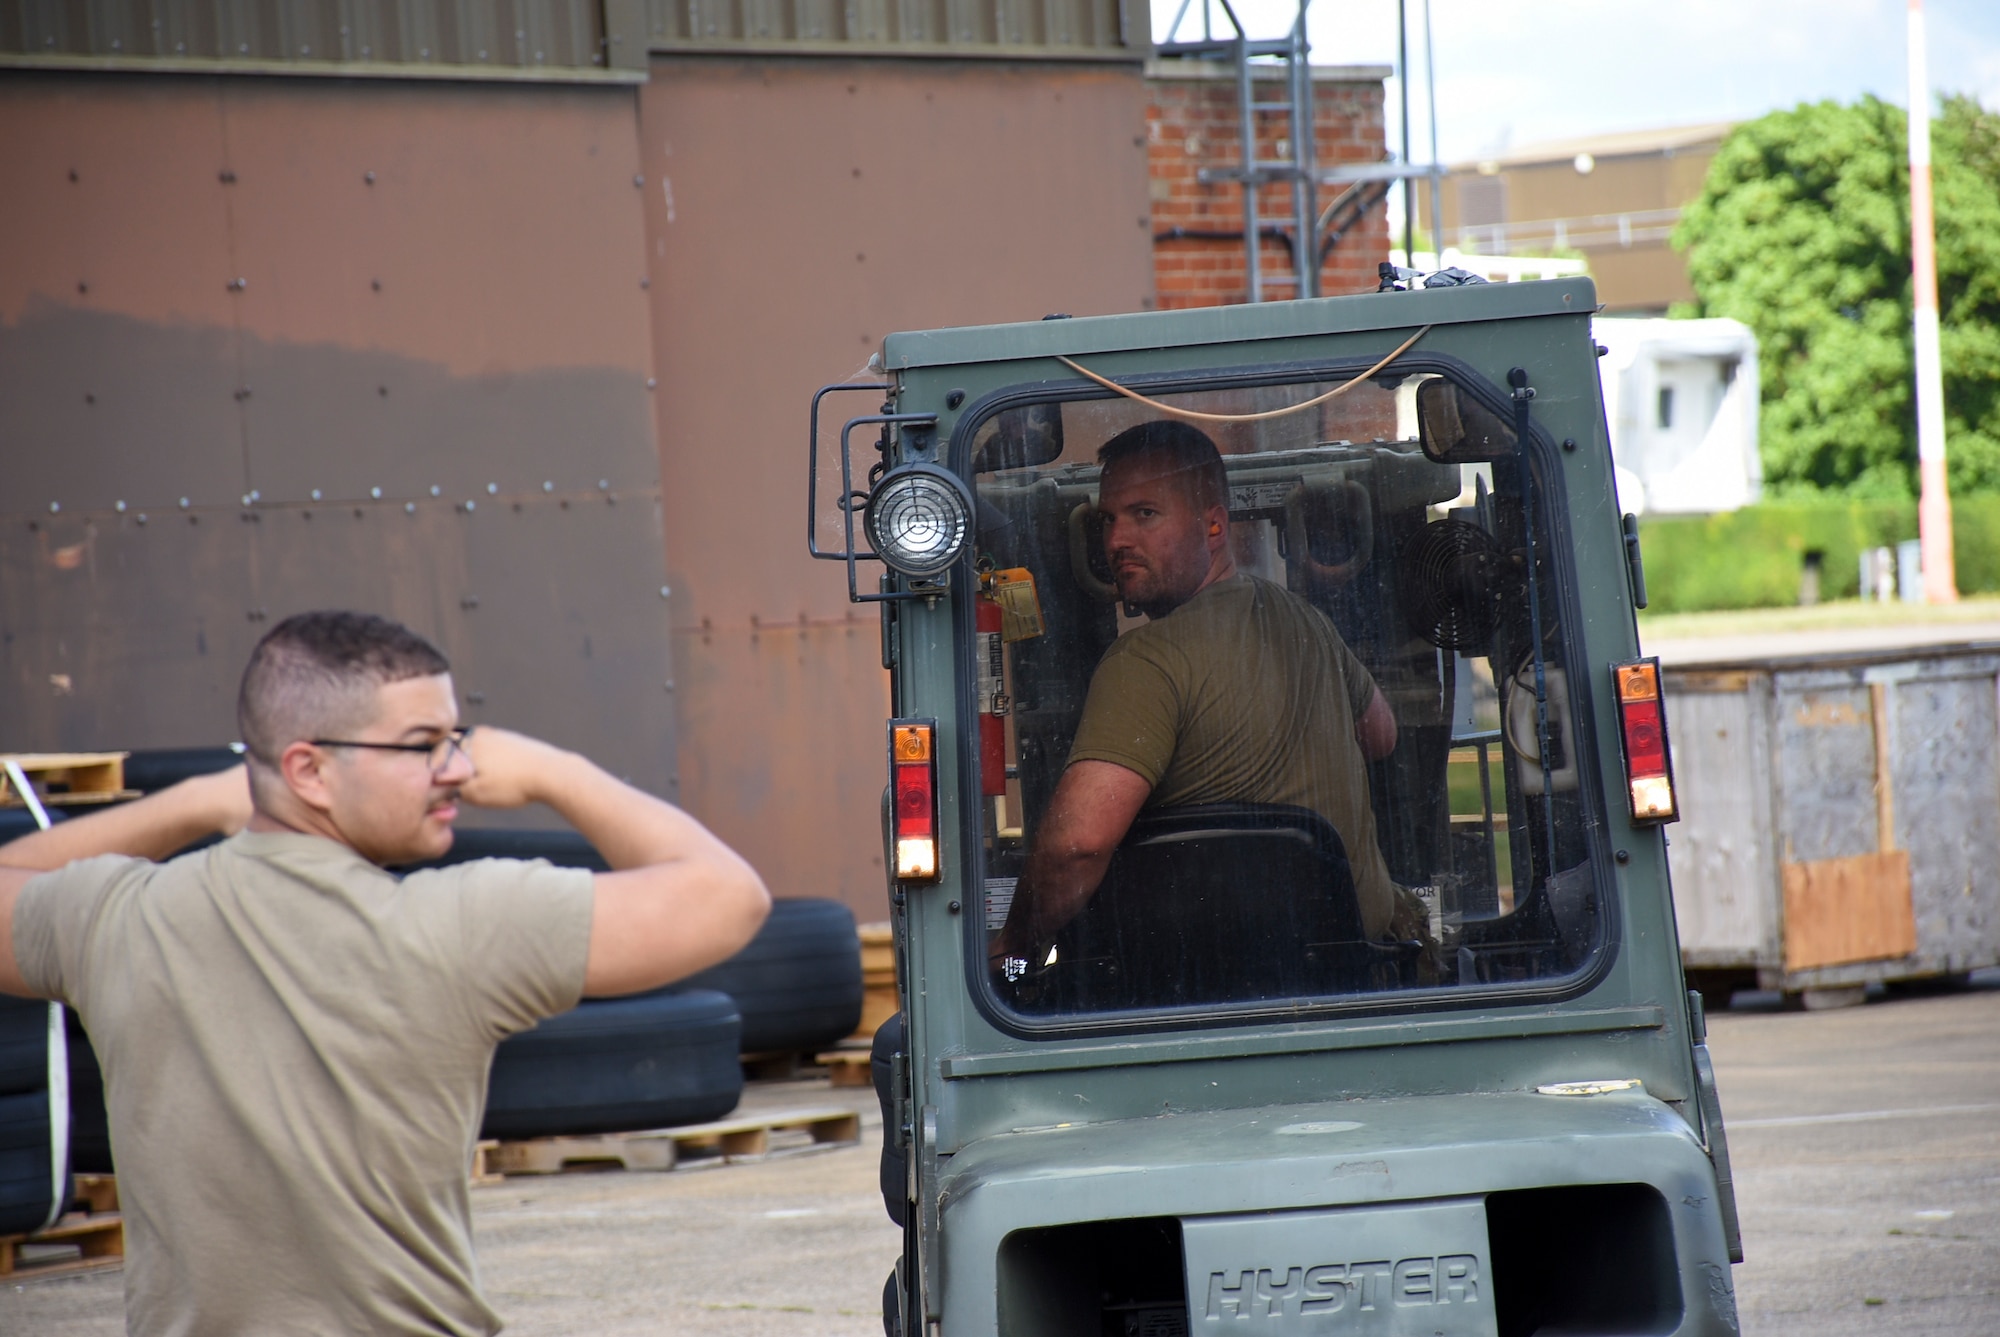 A man motions with his arms to direct a forklift driver as he is backing up.